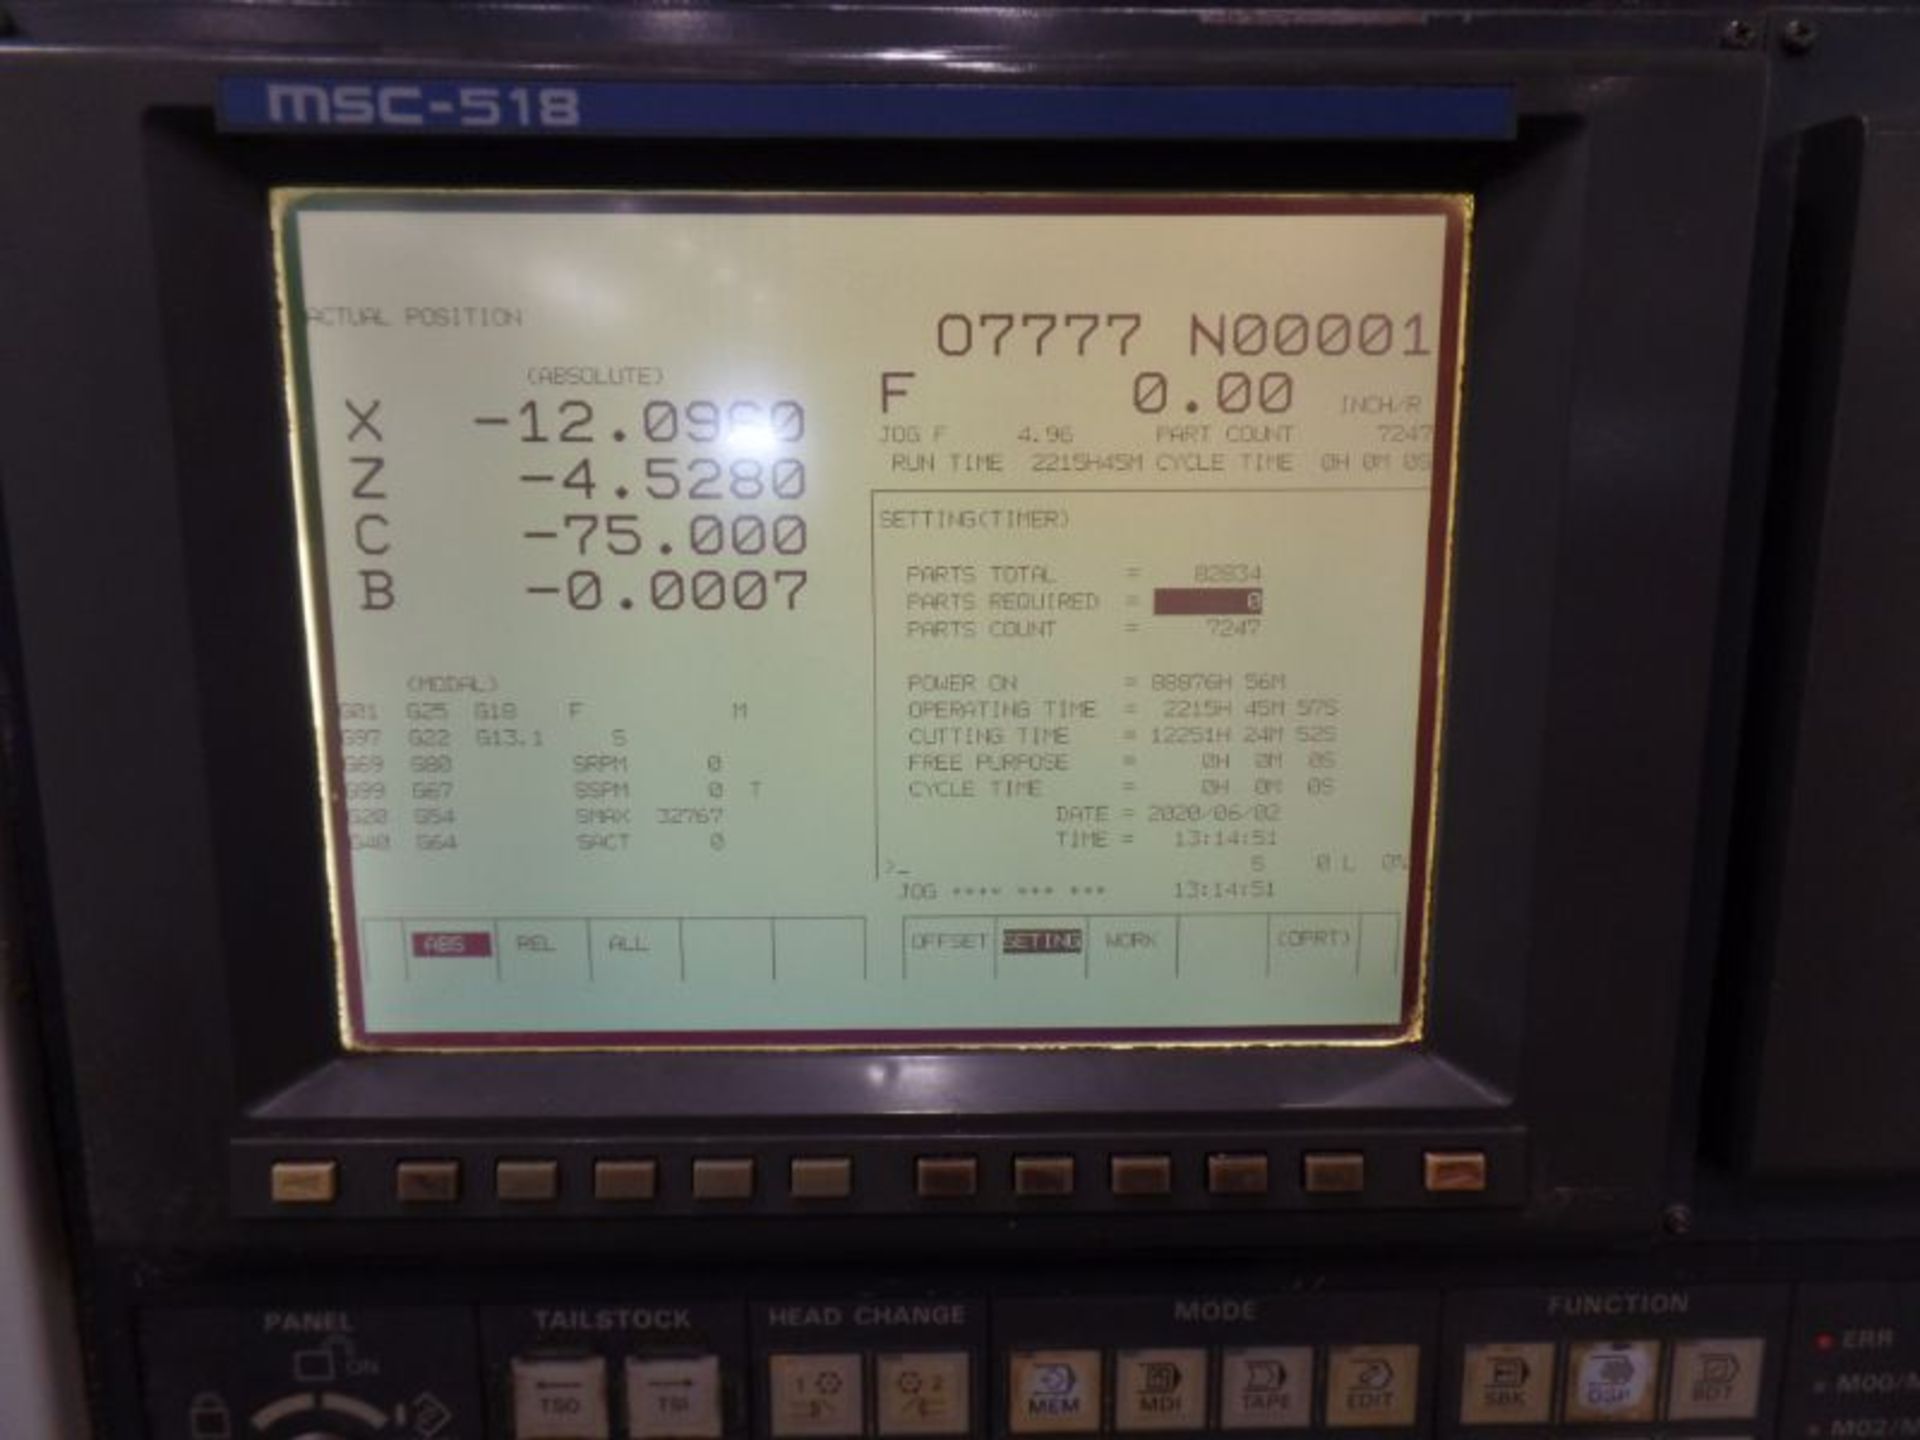 Mori Seiki SL-250BSMC, MSC-518 (Fanuc 18T), sub spindle, Live Tool, C&Y axes, 26.8” SW, 15.3” Max. - Image 7 of 8